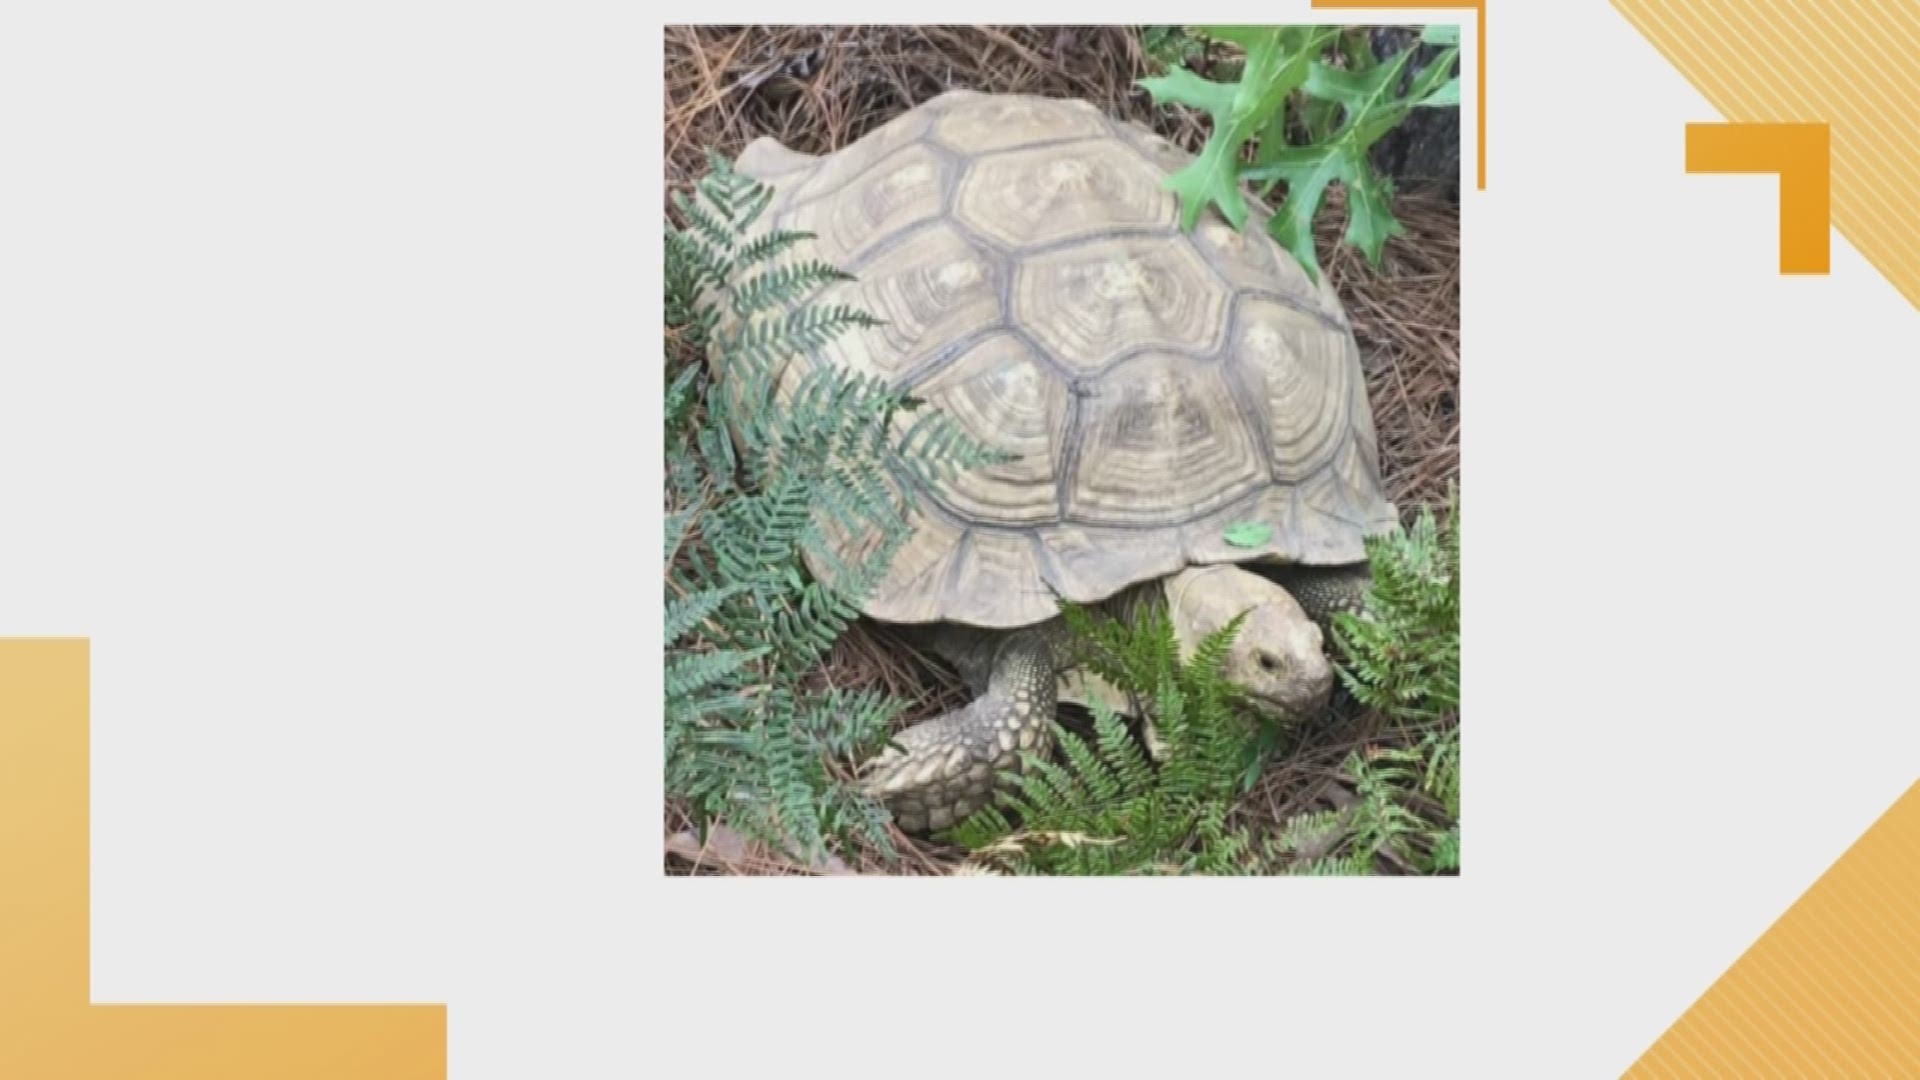 A pet tortoise has been returned home safely.